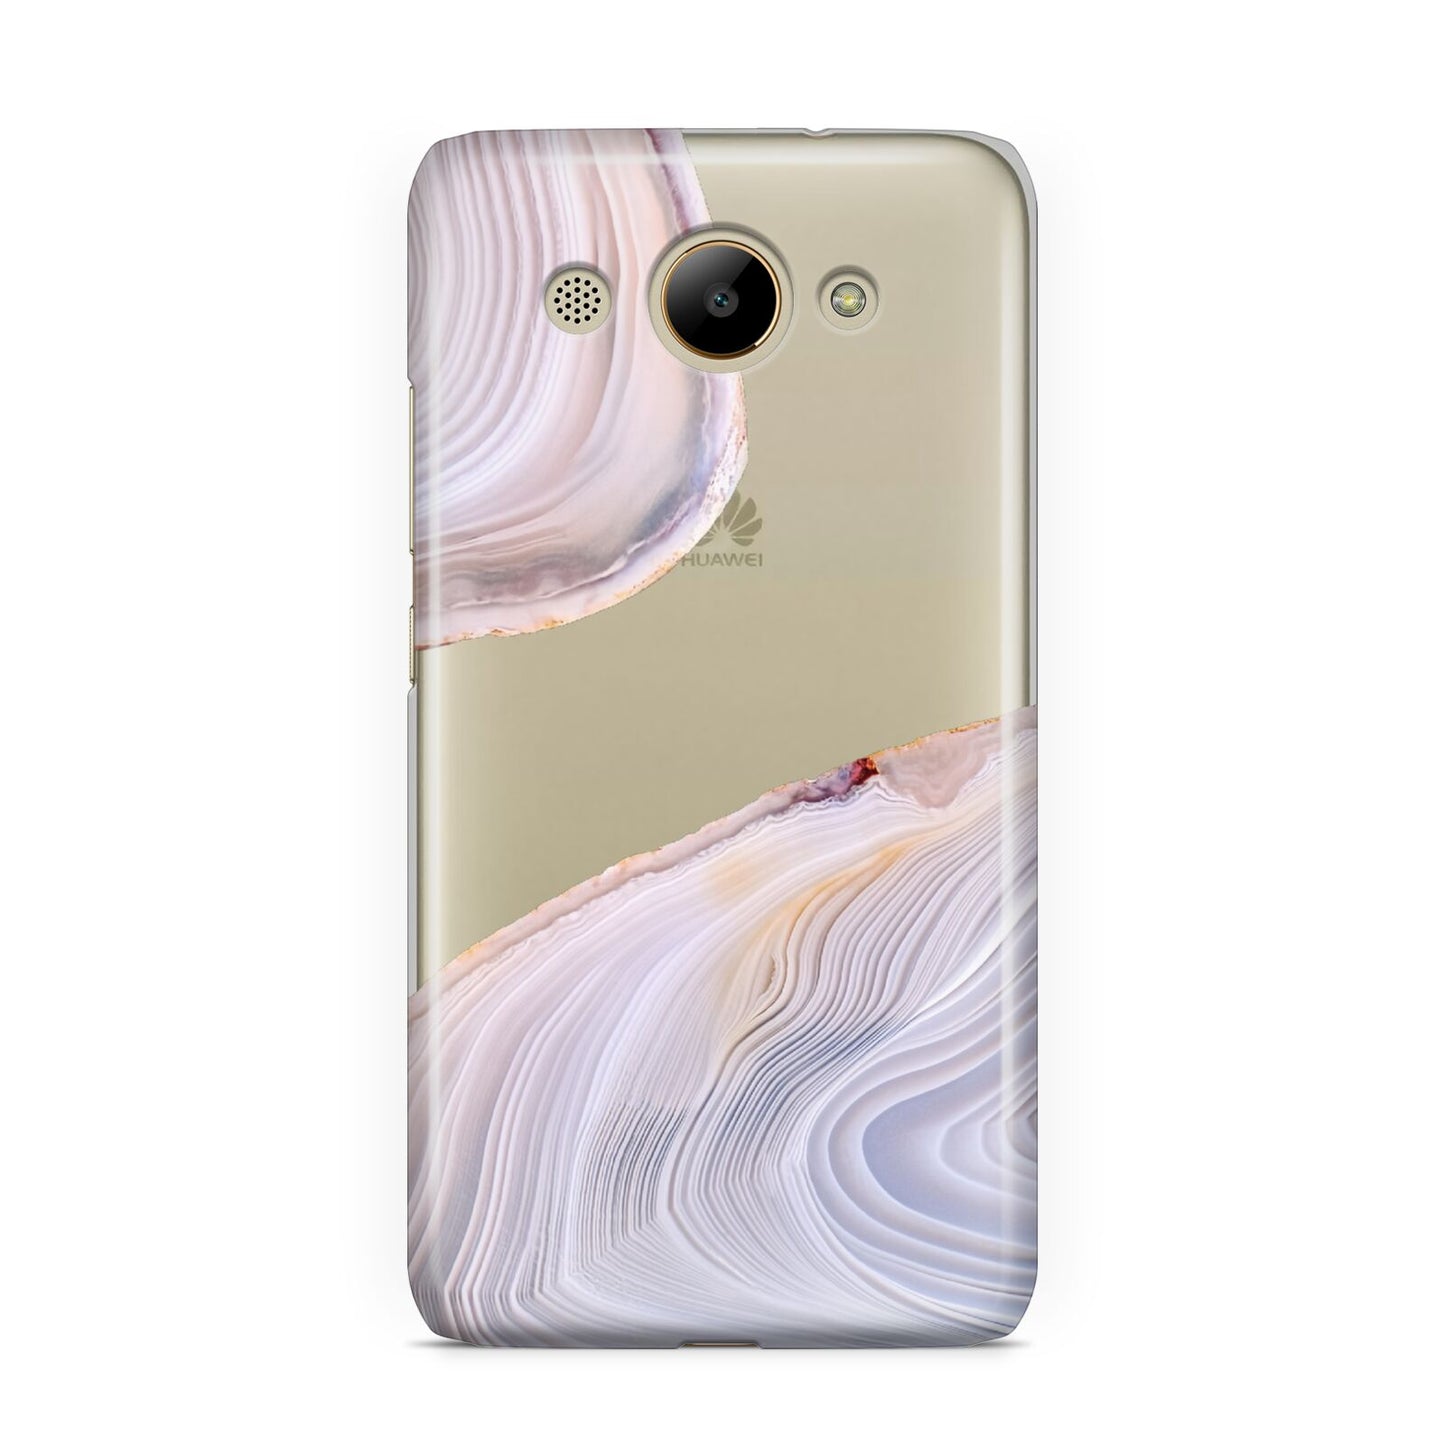 Agate Pale Pink and Blue Huawei Y3 2017